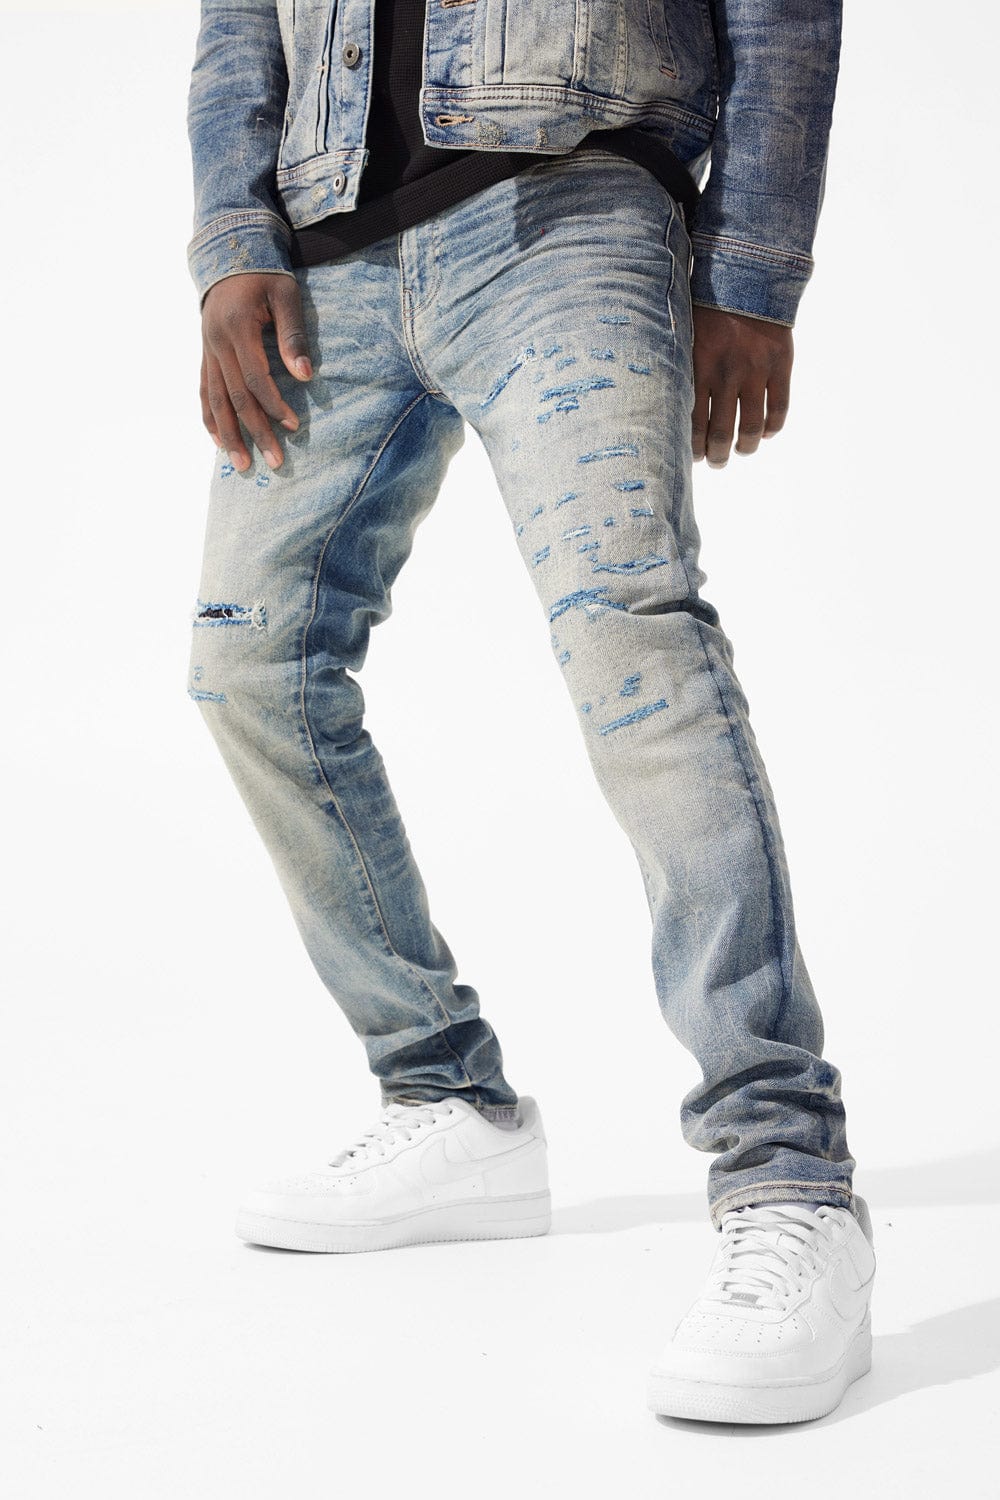 Blue Cotton Mens Ripped Jeans, Waist Size: 28 - 34 at Rs 425/piece in New  Delhi